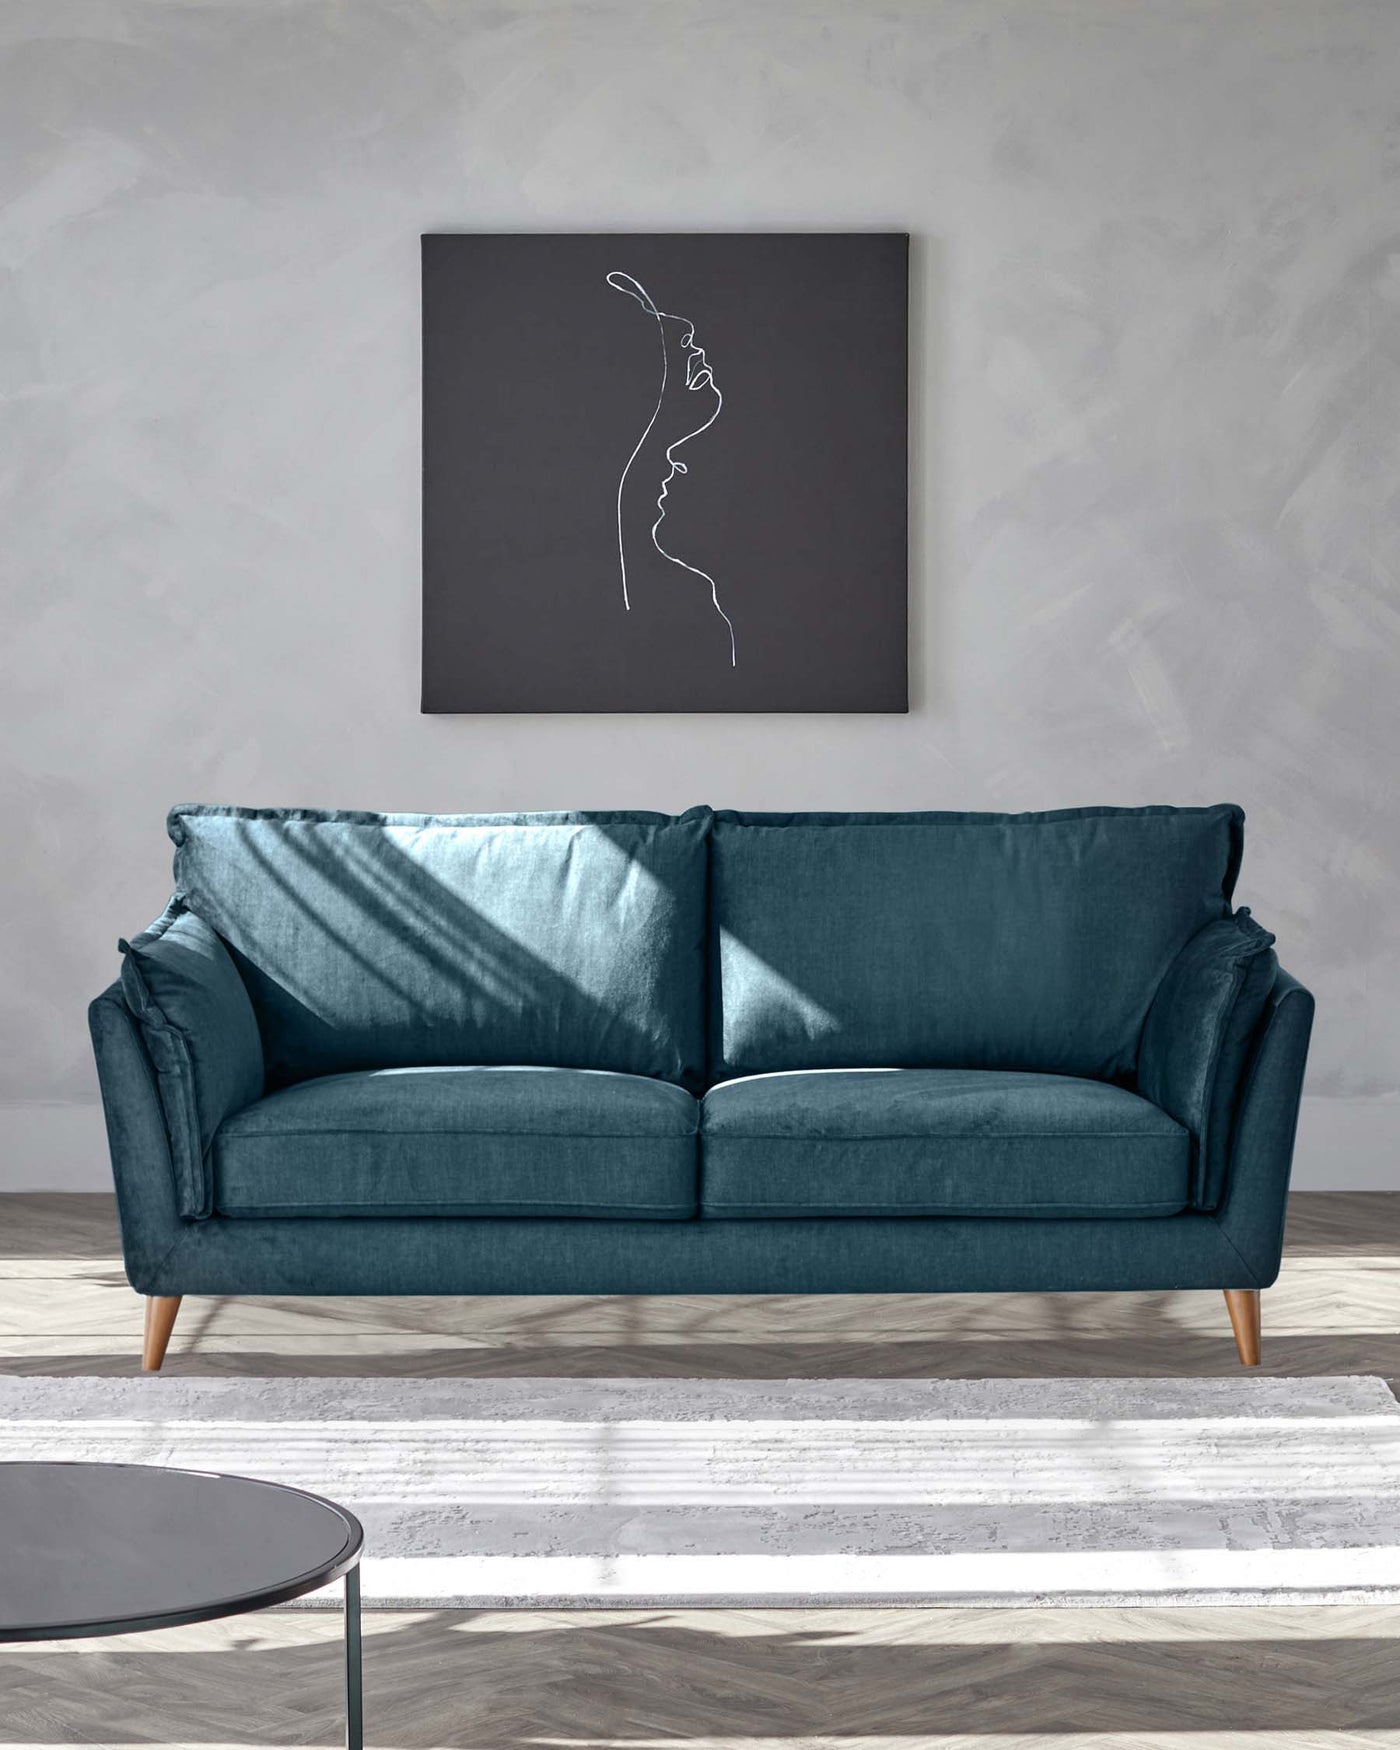 A modern teal blue fabric sofa with three seat cushions and cylindrical wooden legs, accompanied by a round glass-top coffee table with a thin black metal frame, placed on a white and grey patterned rug. A monochromatic artwork hangs above the sofa, adding a touch of elegance to the scene.